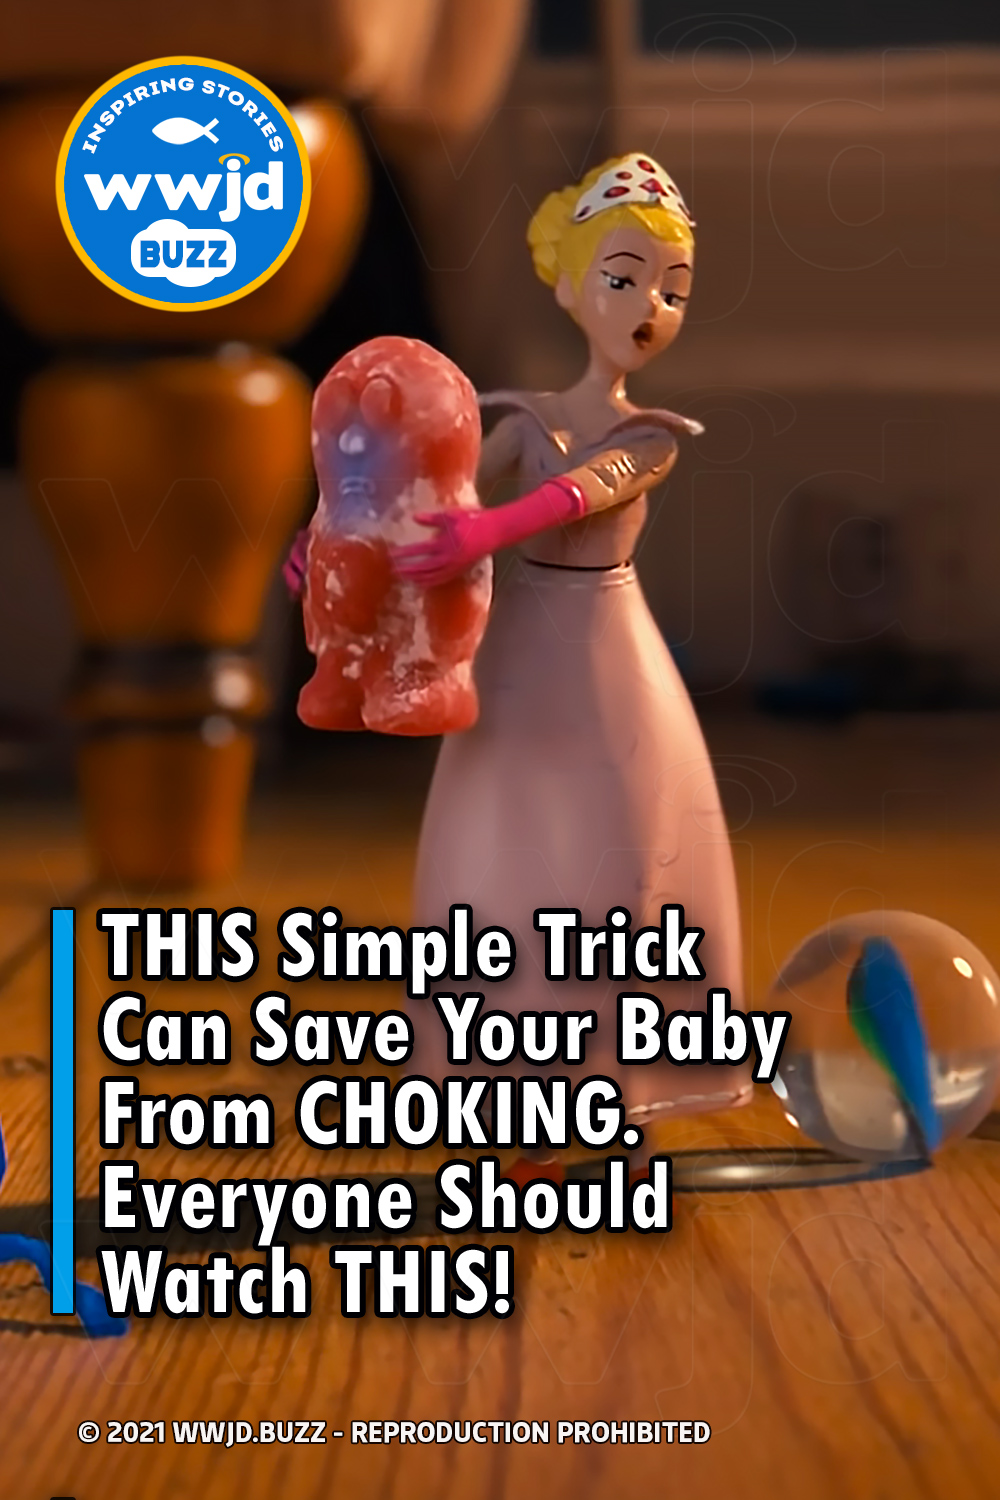 THIS Simple Trick Can Save Your Baby From CHOKING. Everyone Should Watch THIS!